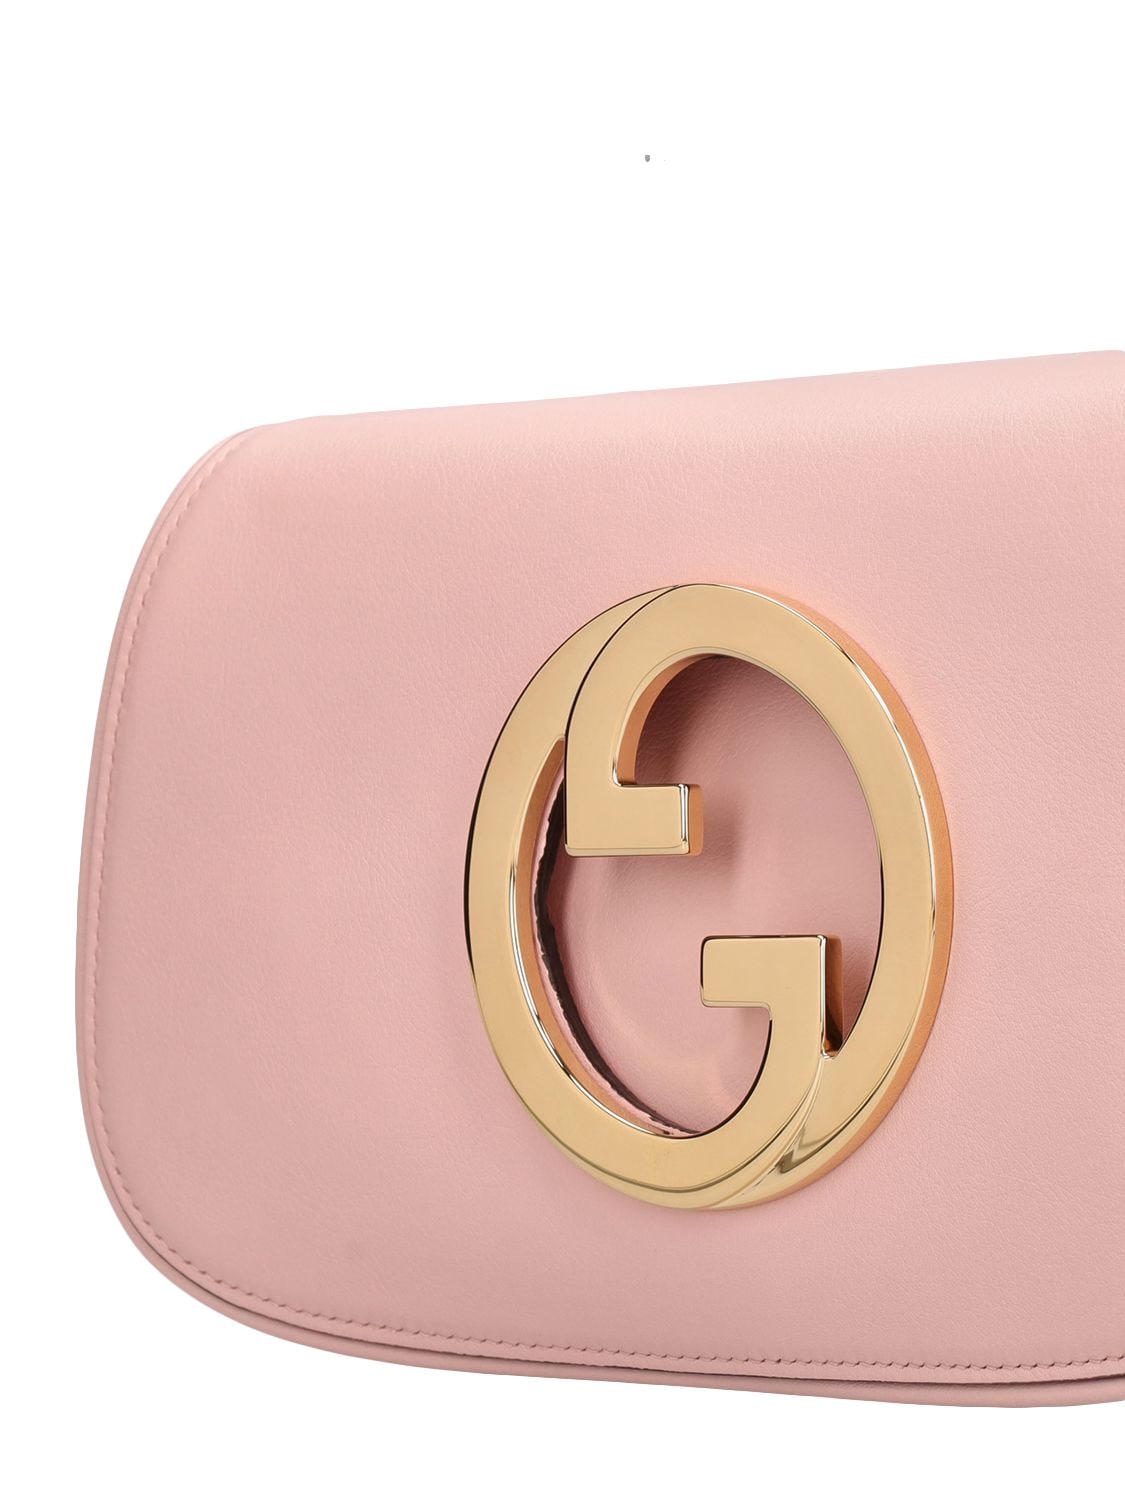 Gucci Blondie Leather Shoulder Bag in Pink - Gucci